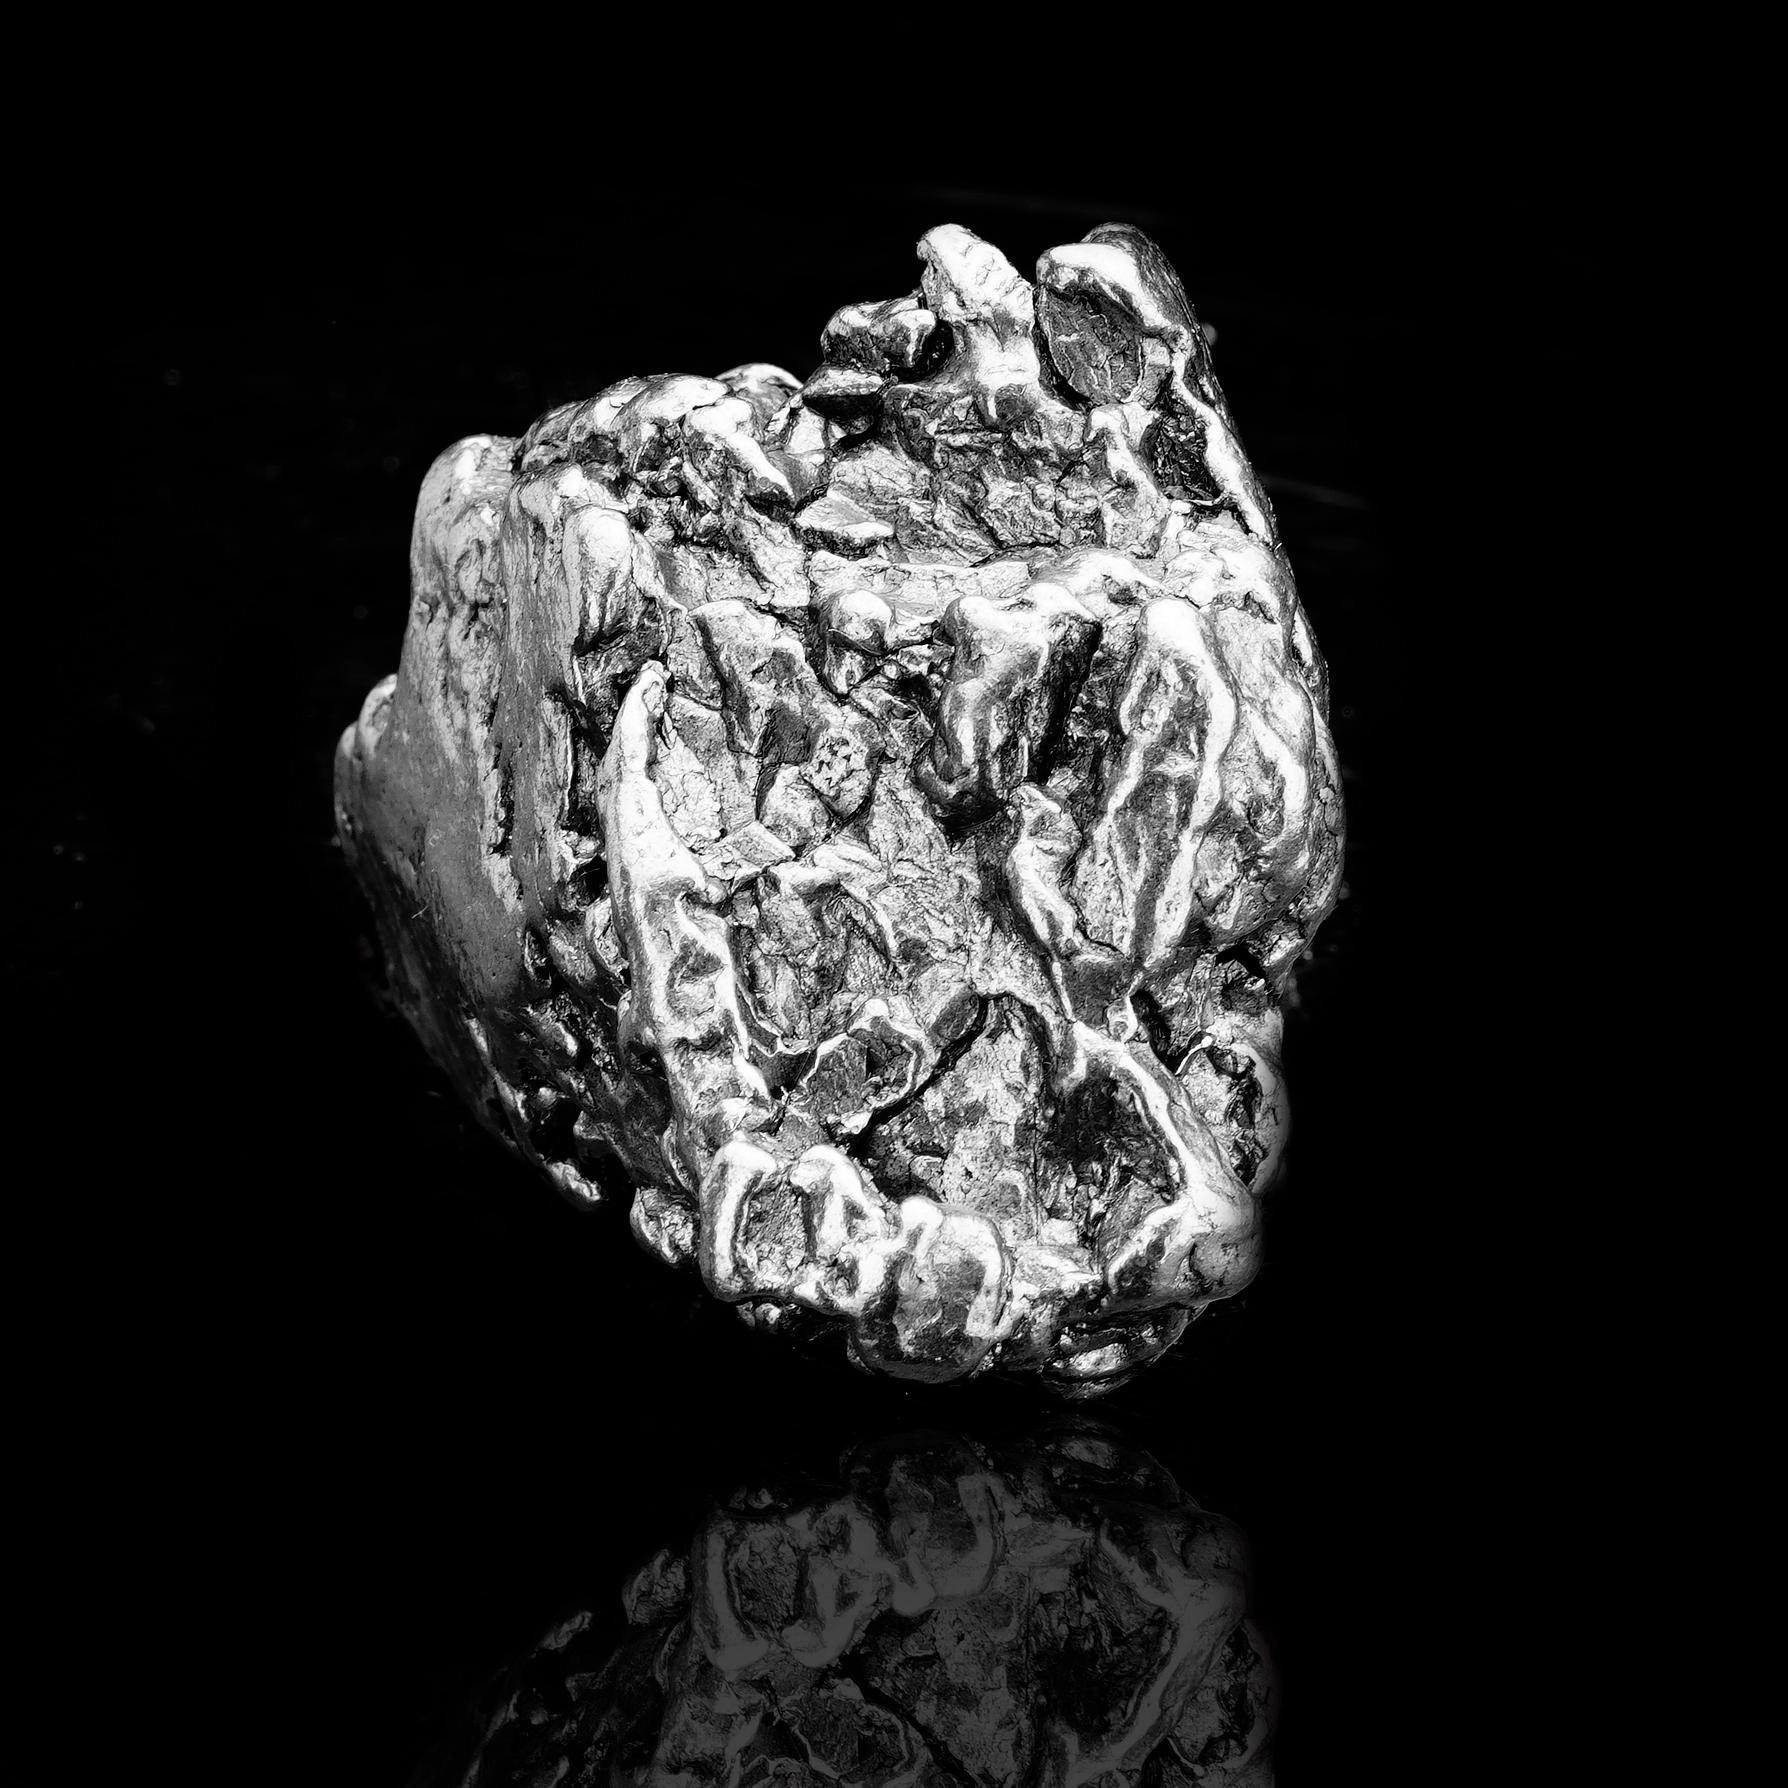 The Campo del Cielo iron meteorites were discovered in 1576 about 500 miles northwest of Buenos Aires, Argentina. Testing proved the 